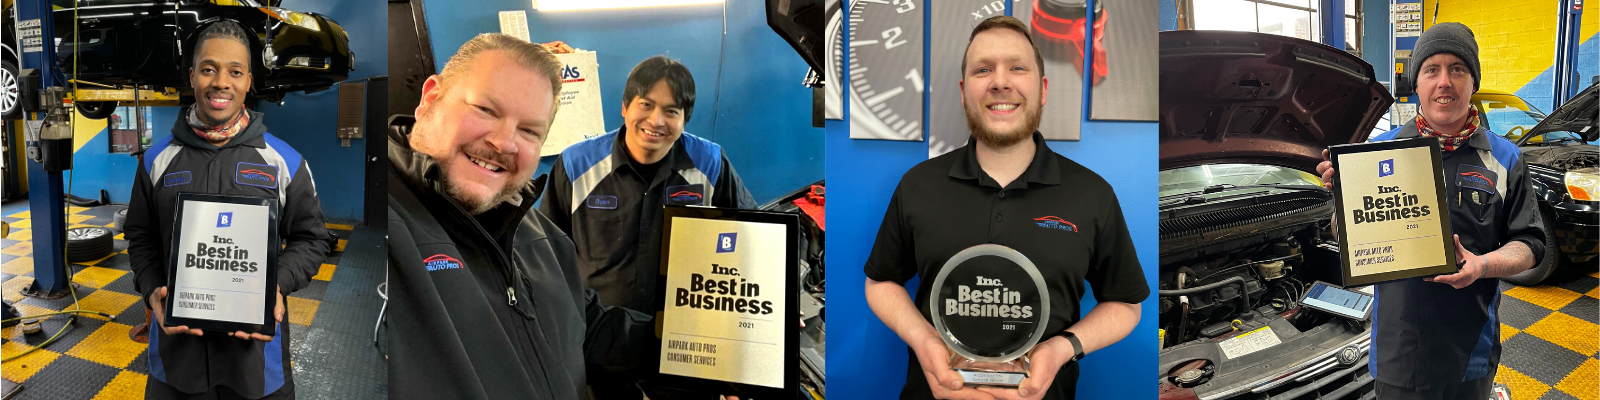 Best in Business Award | Airpark Auto Pros